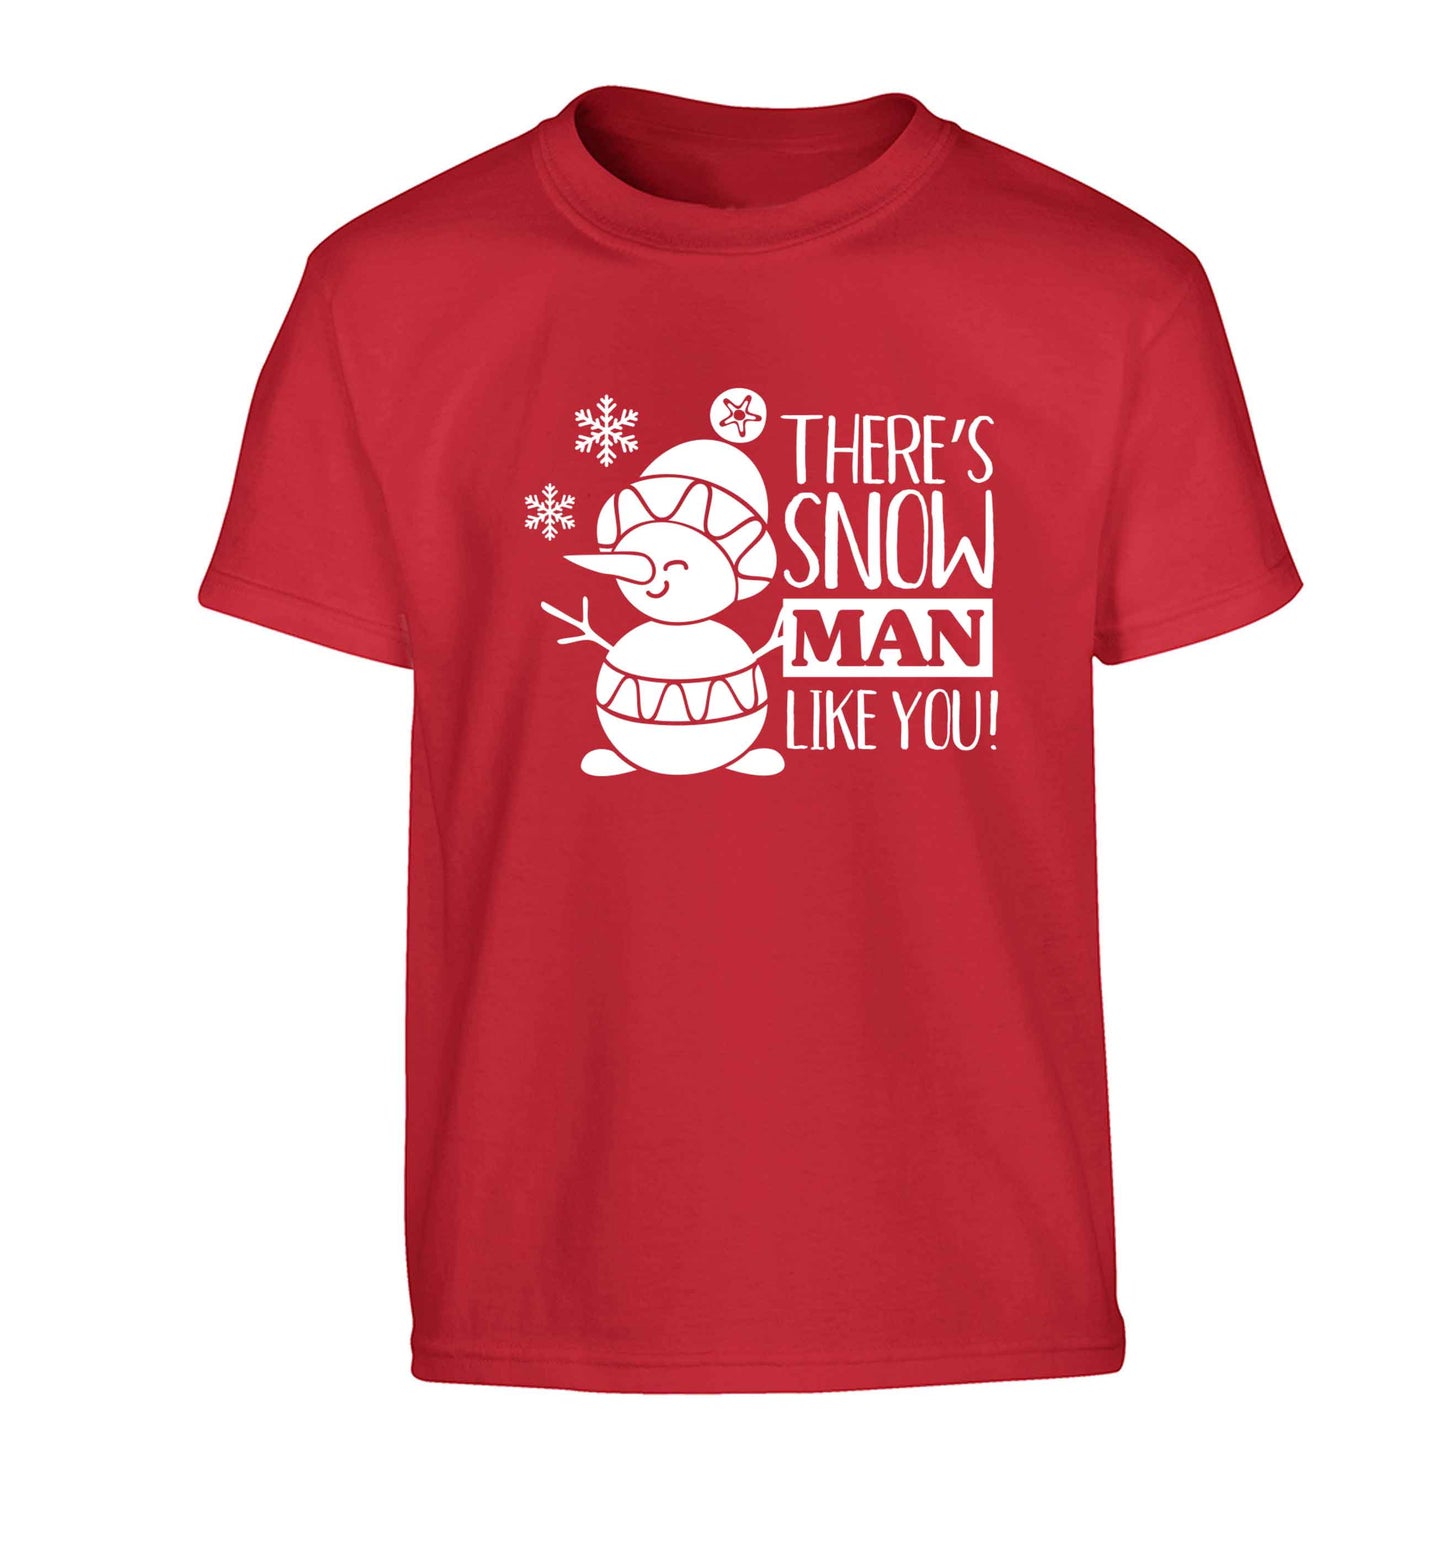 There's snow man like you Children's red Tshirt 12-13 Years